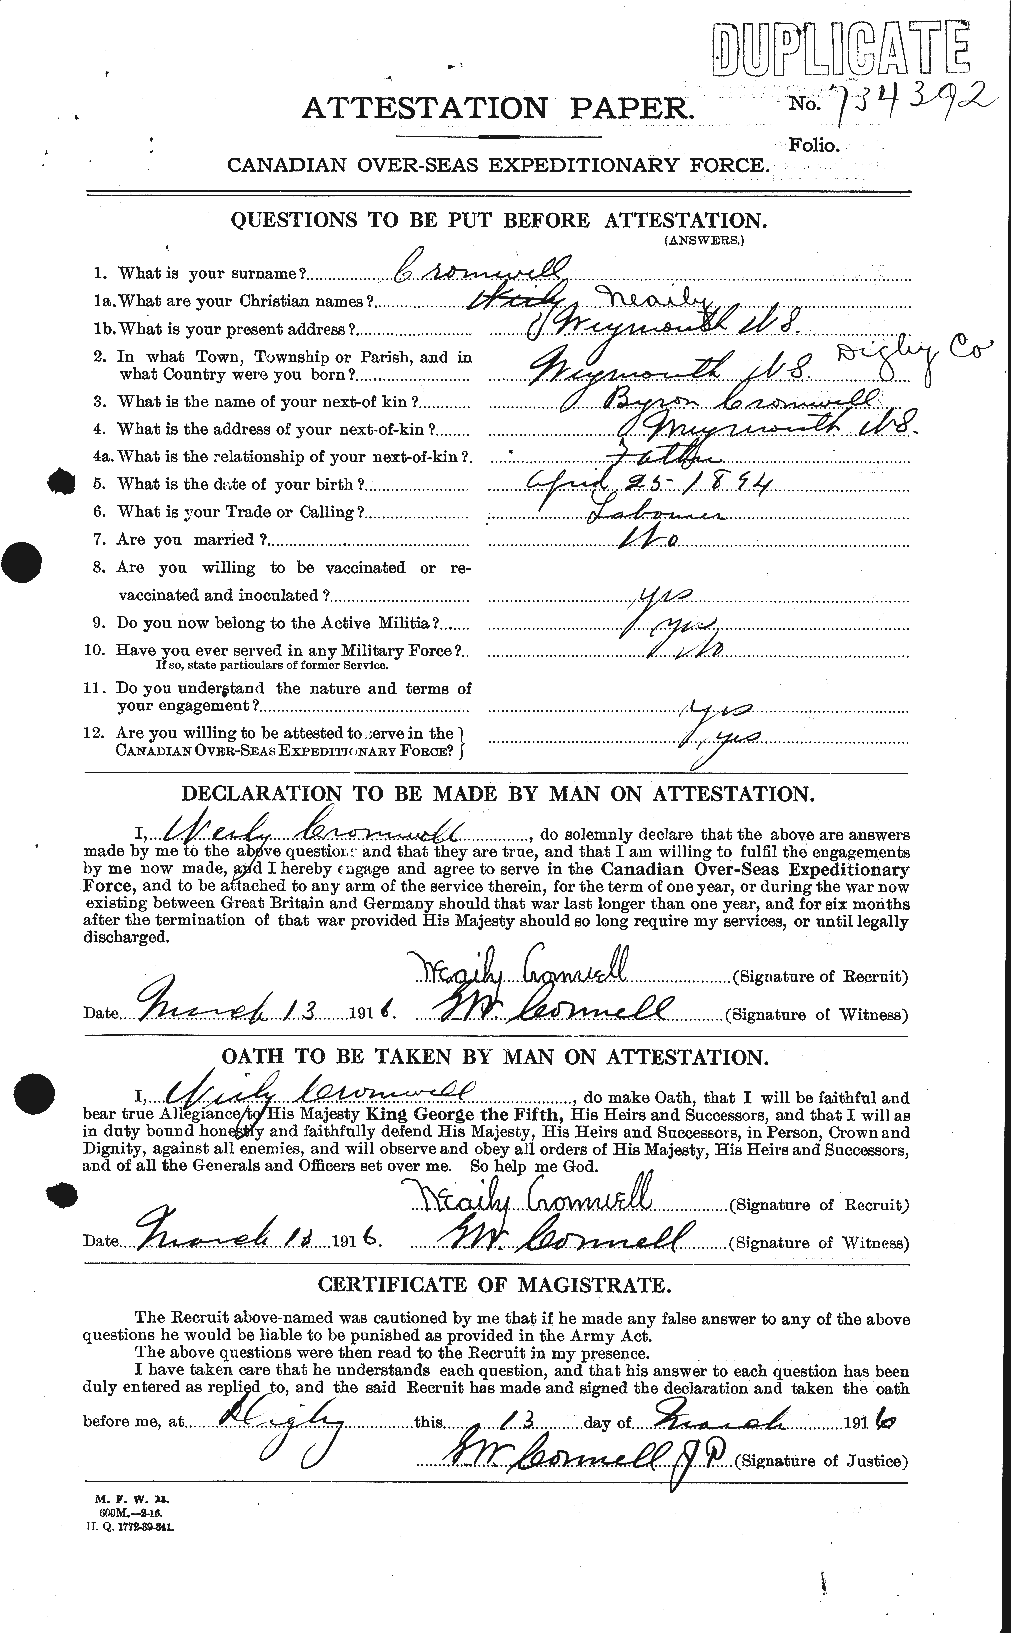 Personnel Records of the First World War - CEF 064914a